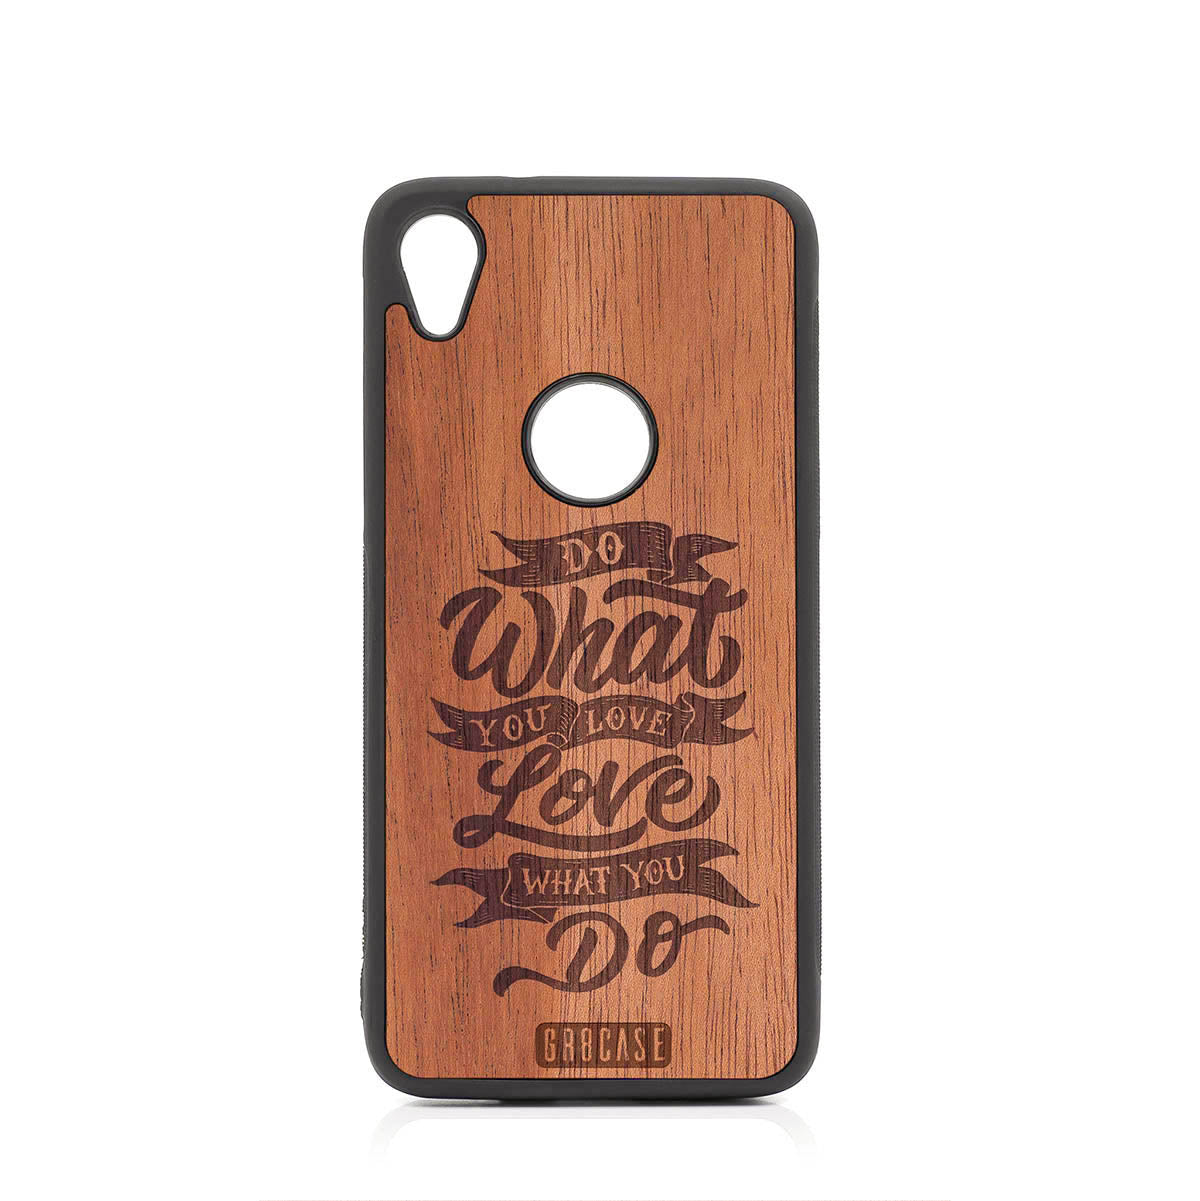 Do What You Love Love What You Do Design Wood Case For Moto E6 by GR8CASE